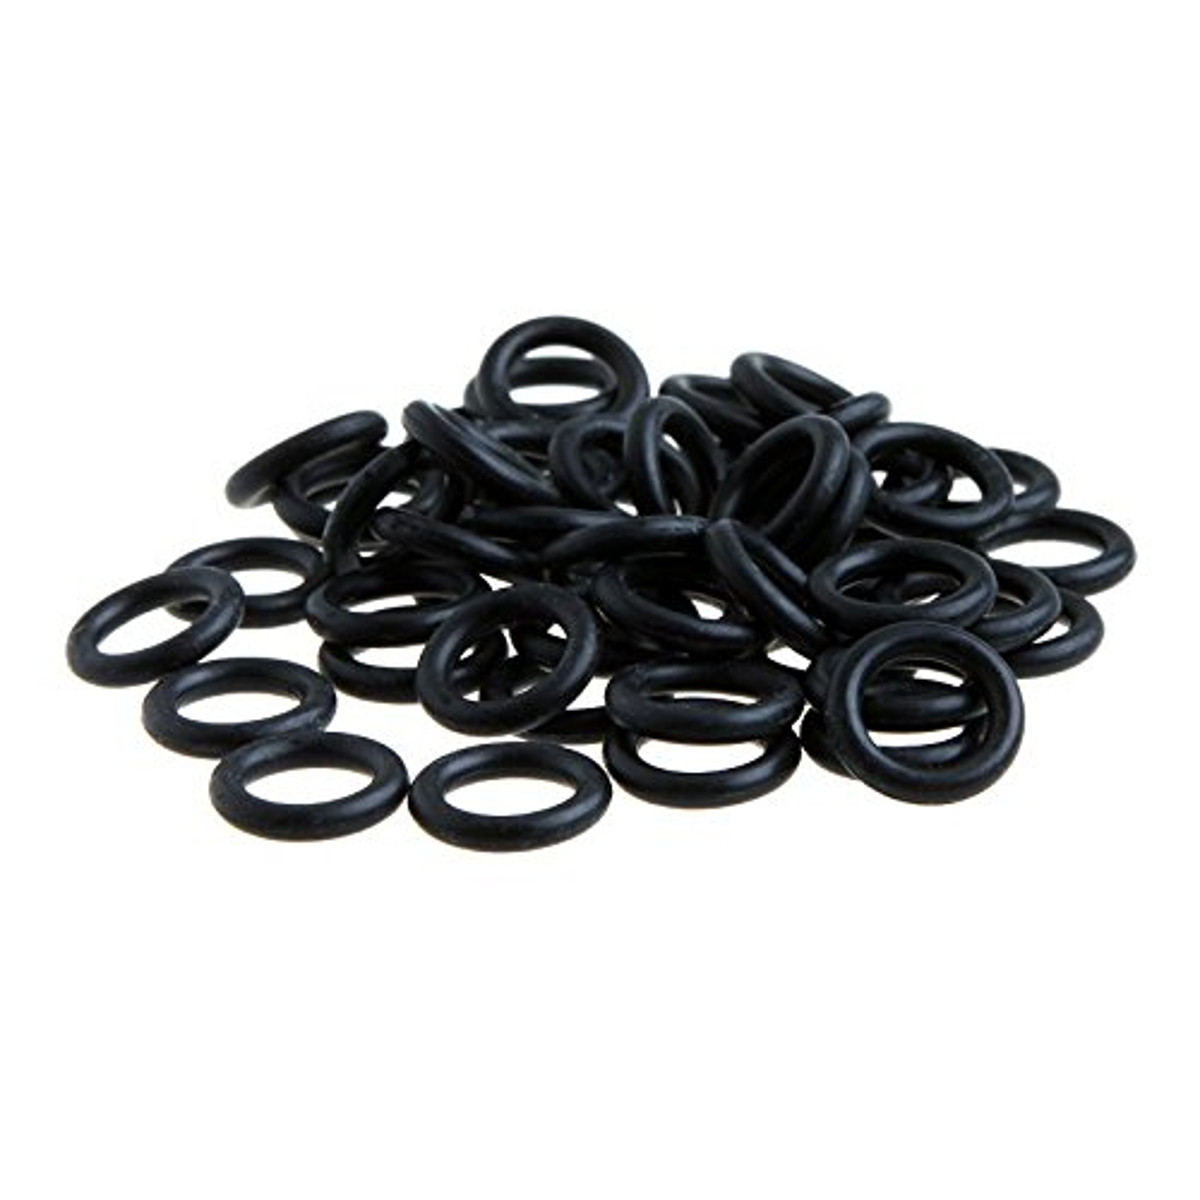 100 Mechanical Keyboard Keycap Rubber O-Ring Switch Dampeners for Cherry MX 30